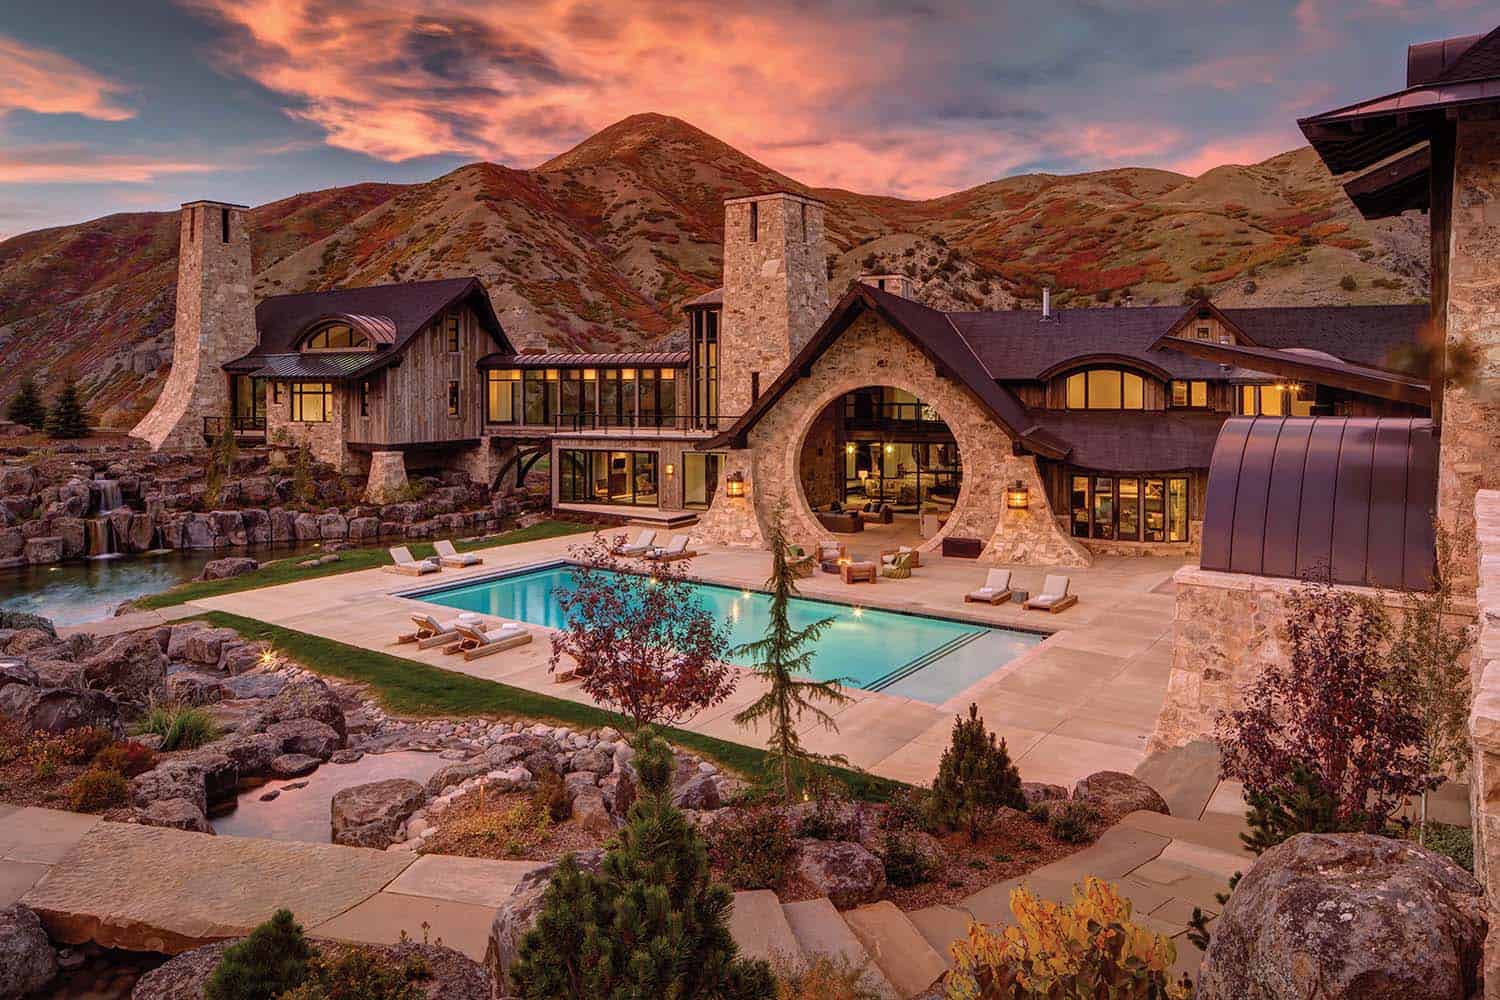 Insane mountain dream home with views of the Wasatch Range, Utah